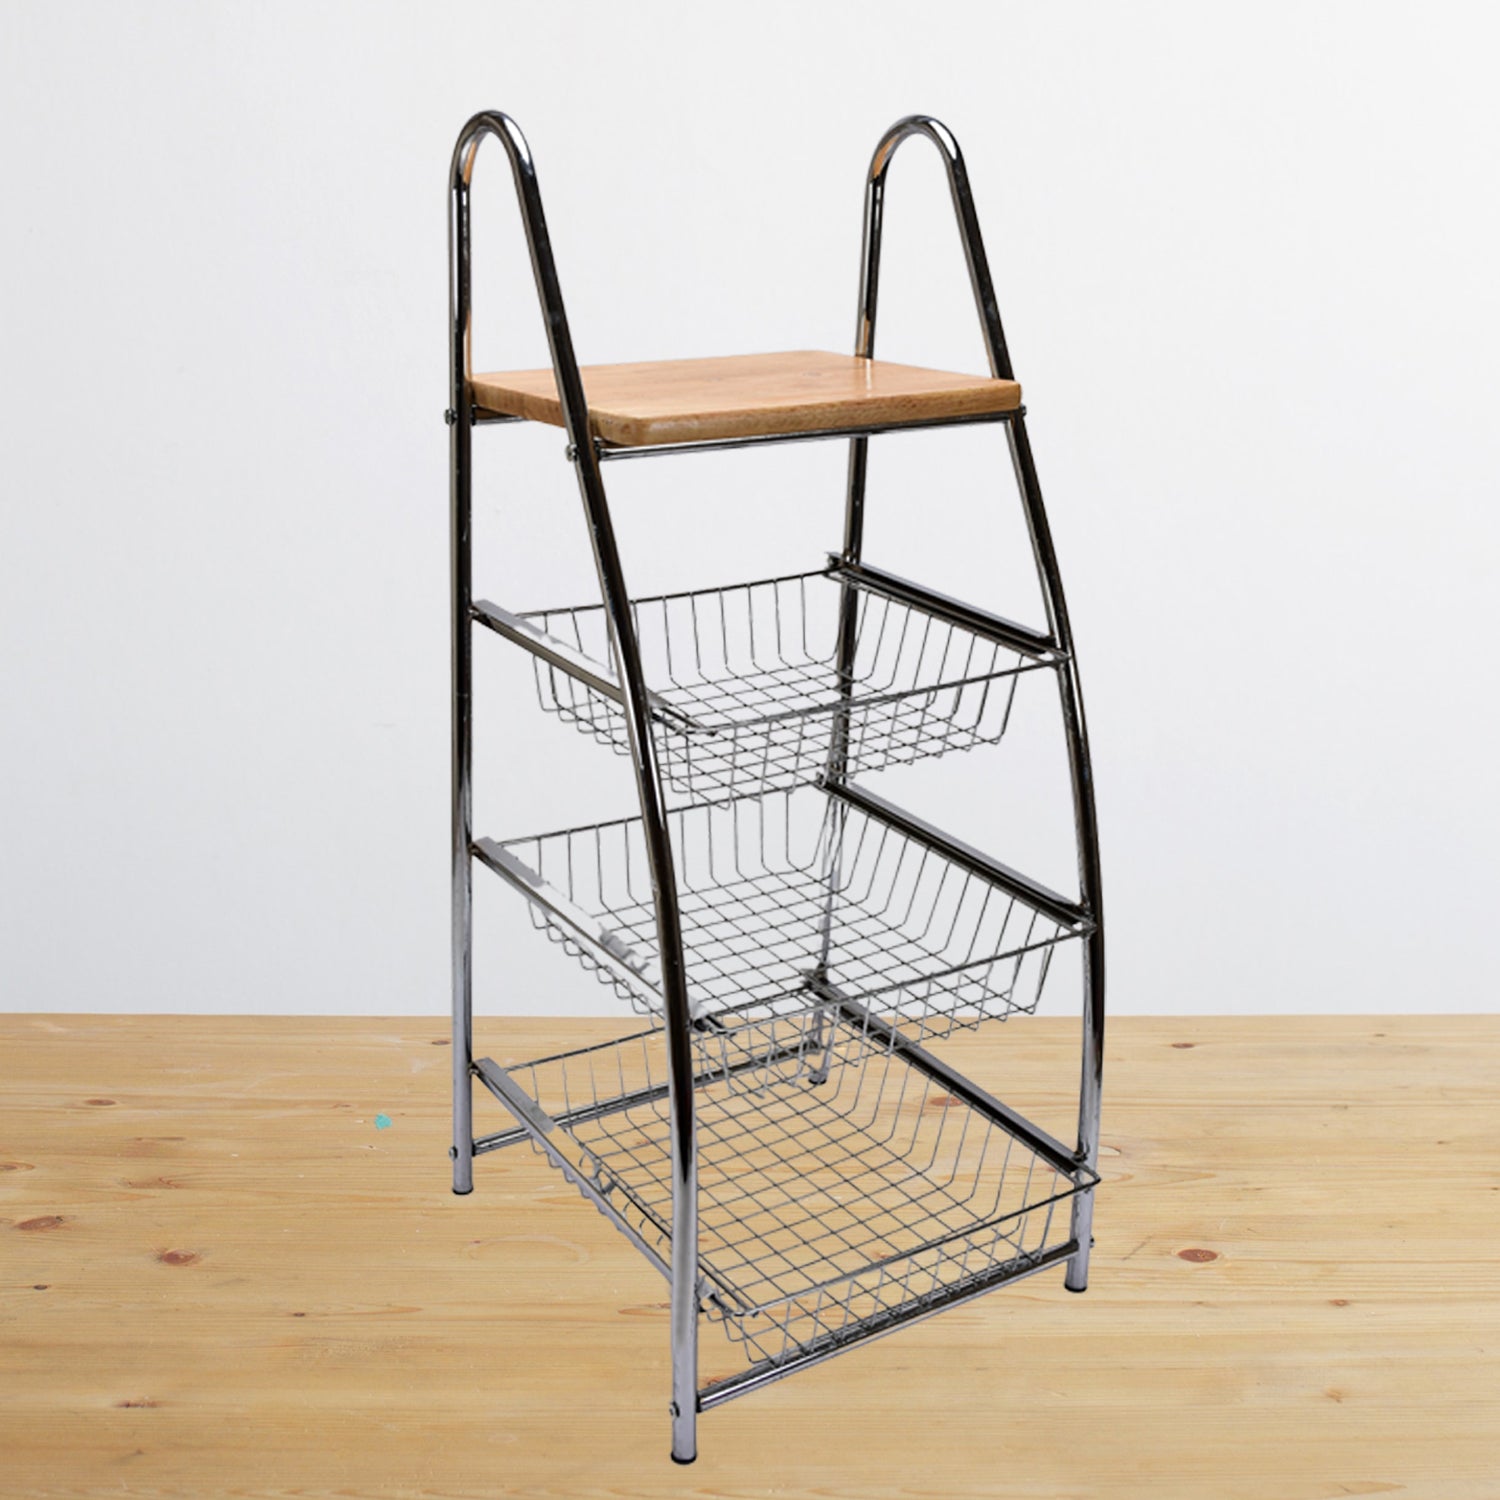 7669 Tkolley Steal High Quality Rack 3 Tier For Kitchen Use DeoDap